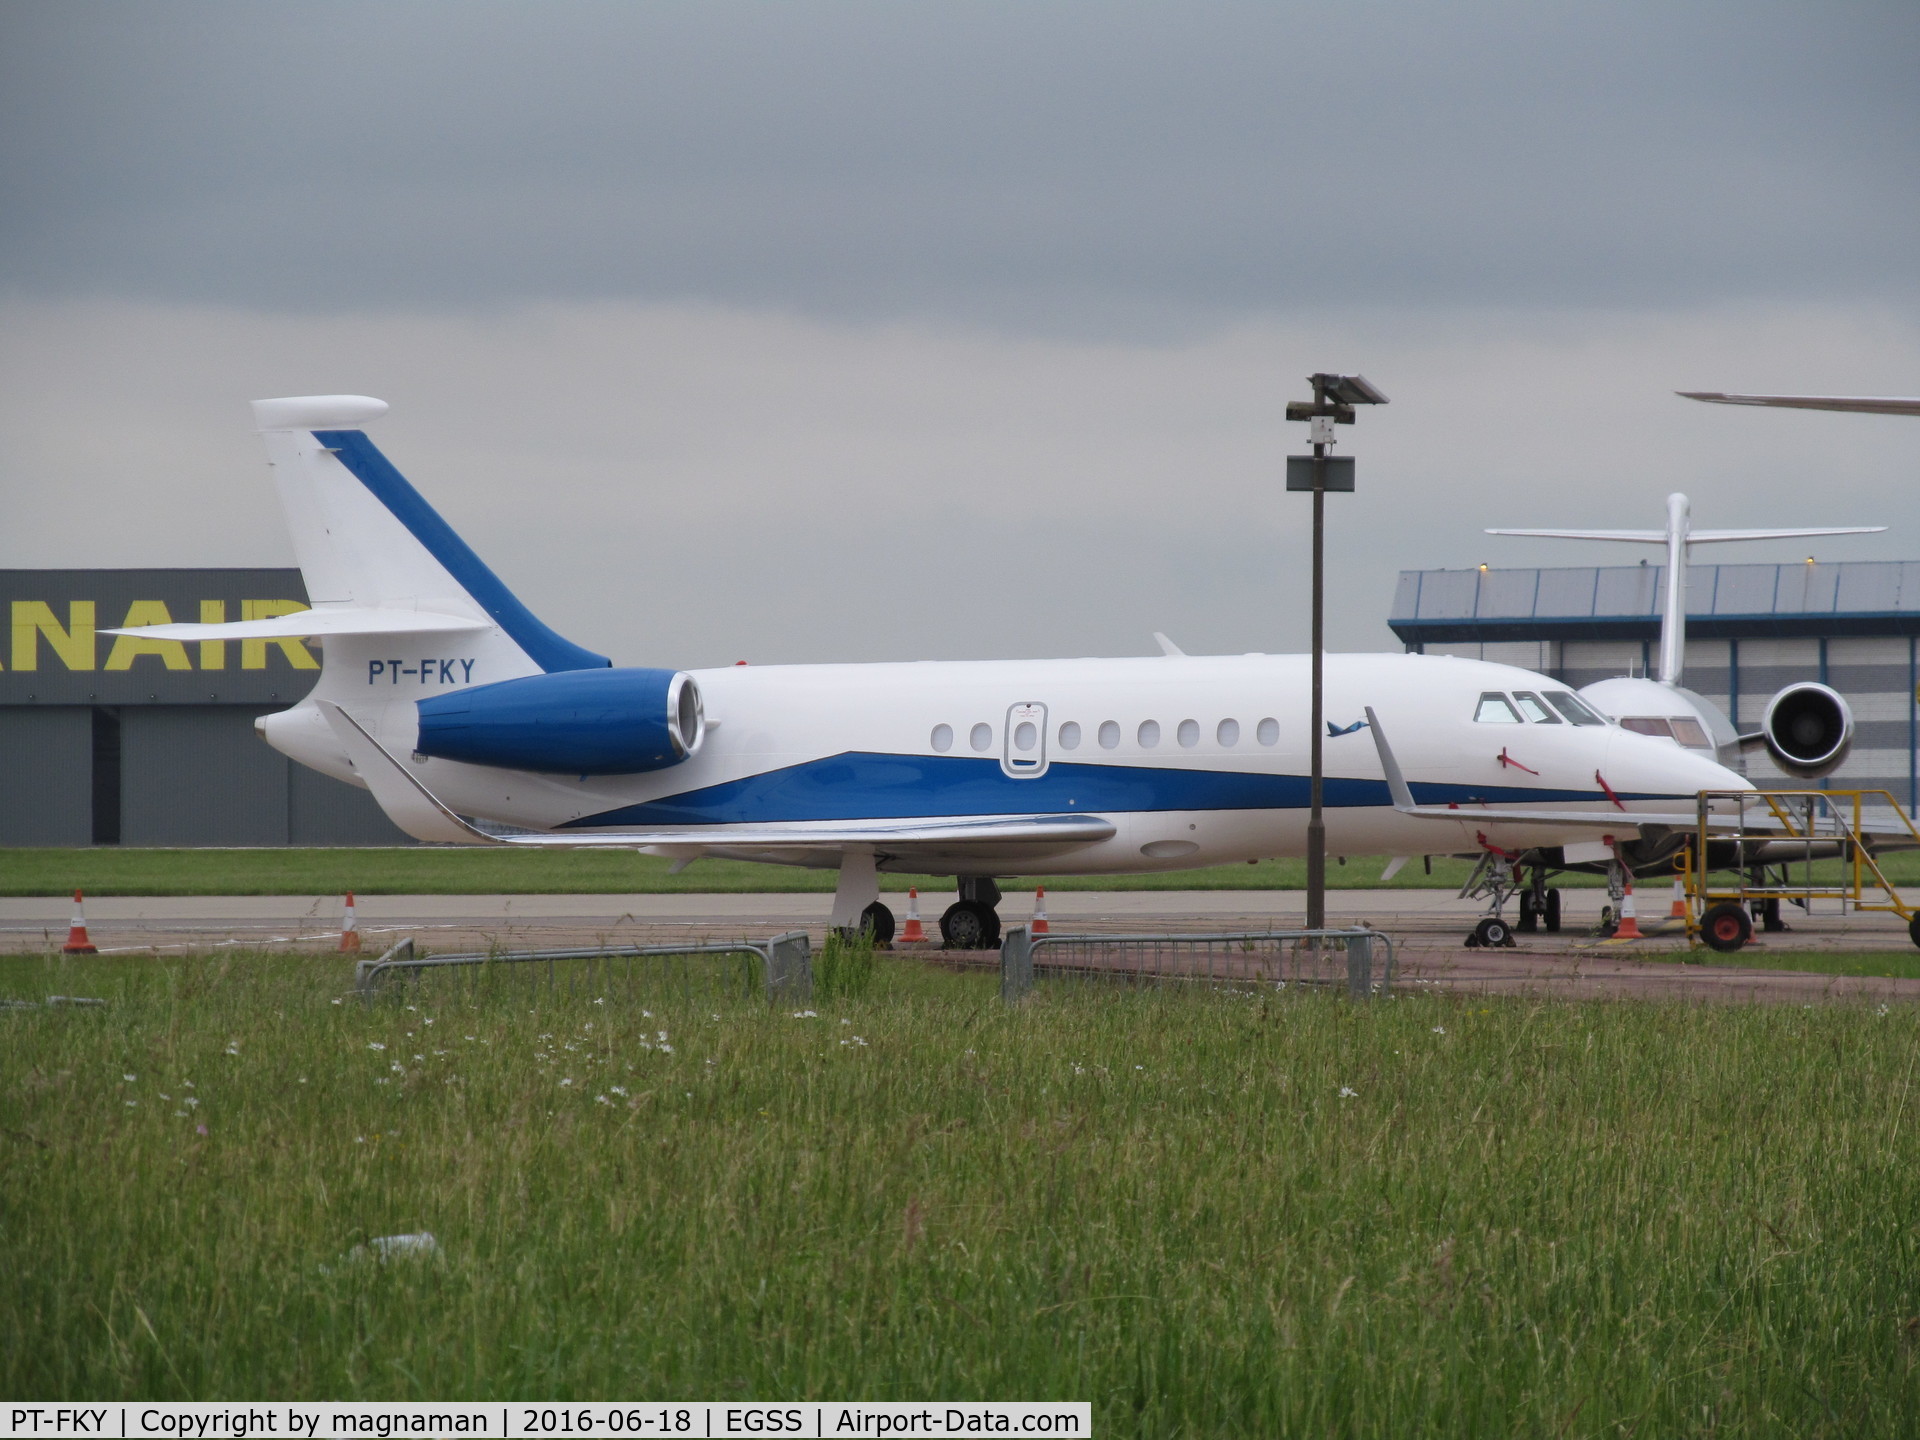 PT-FKY, 2014 Dassault Falcon 2000LX C/N 280, Biz of the day at STN